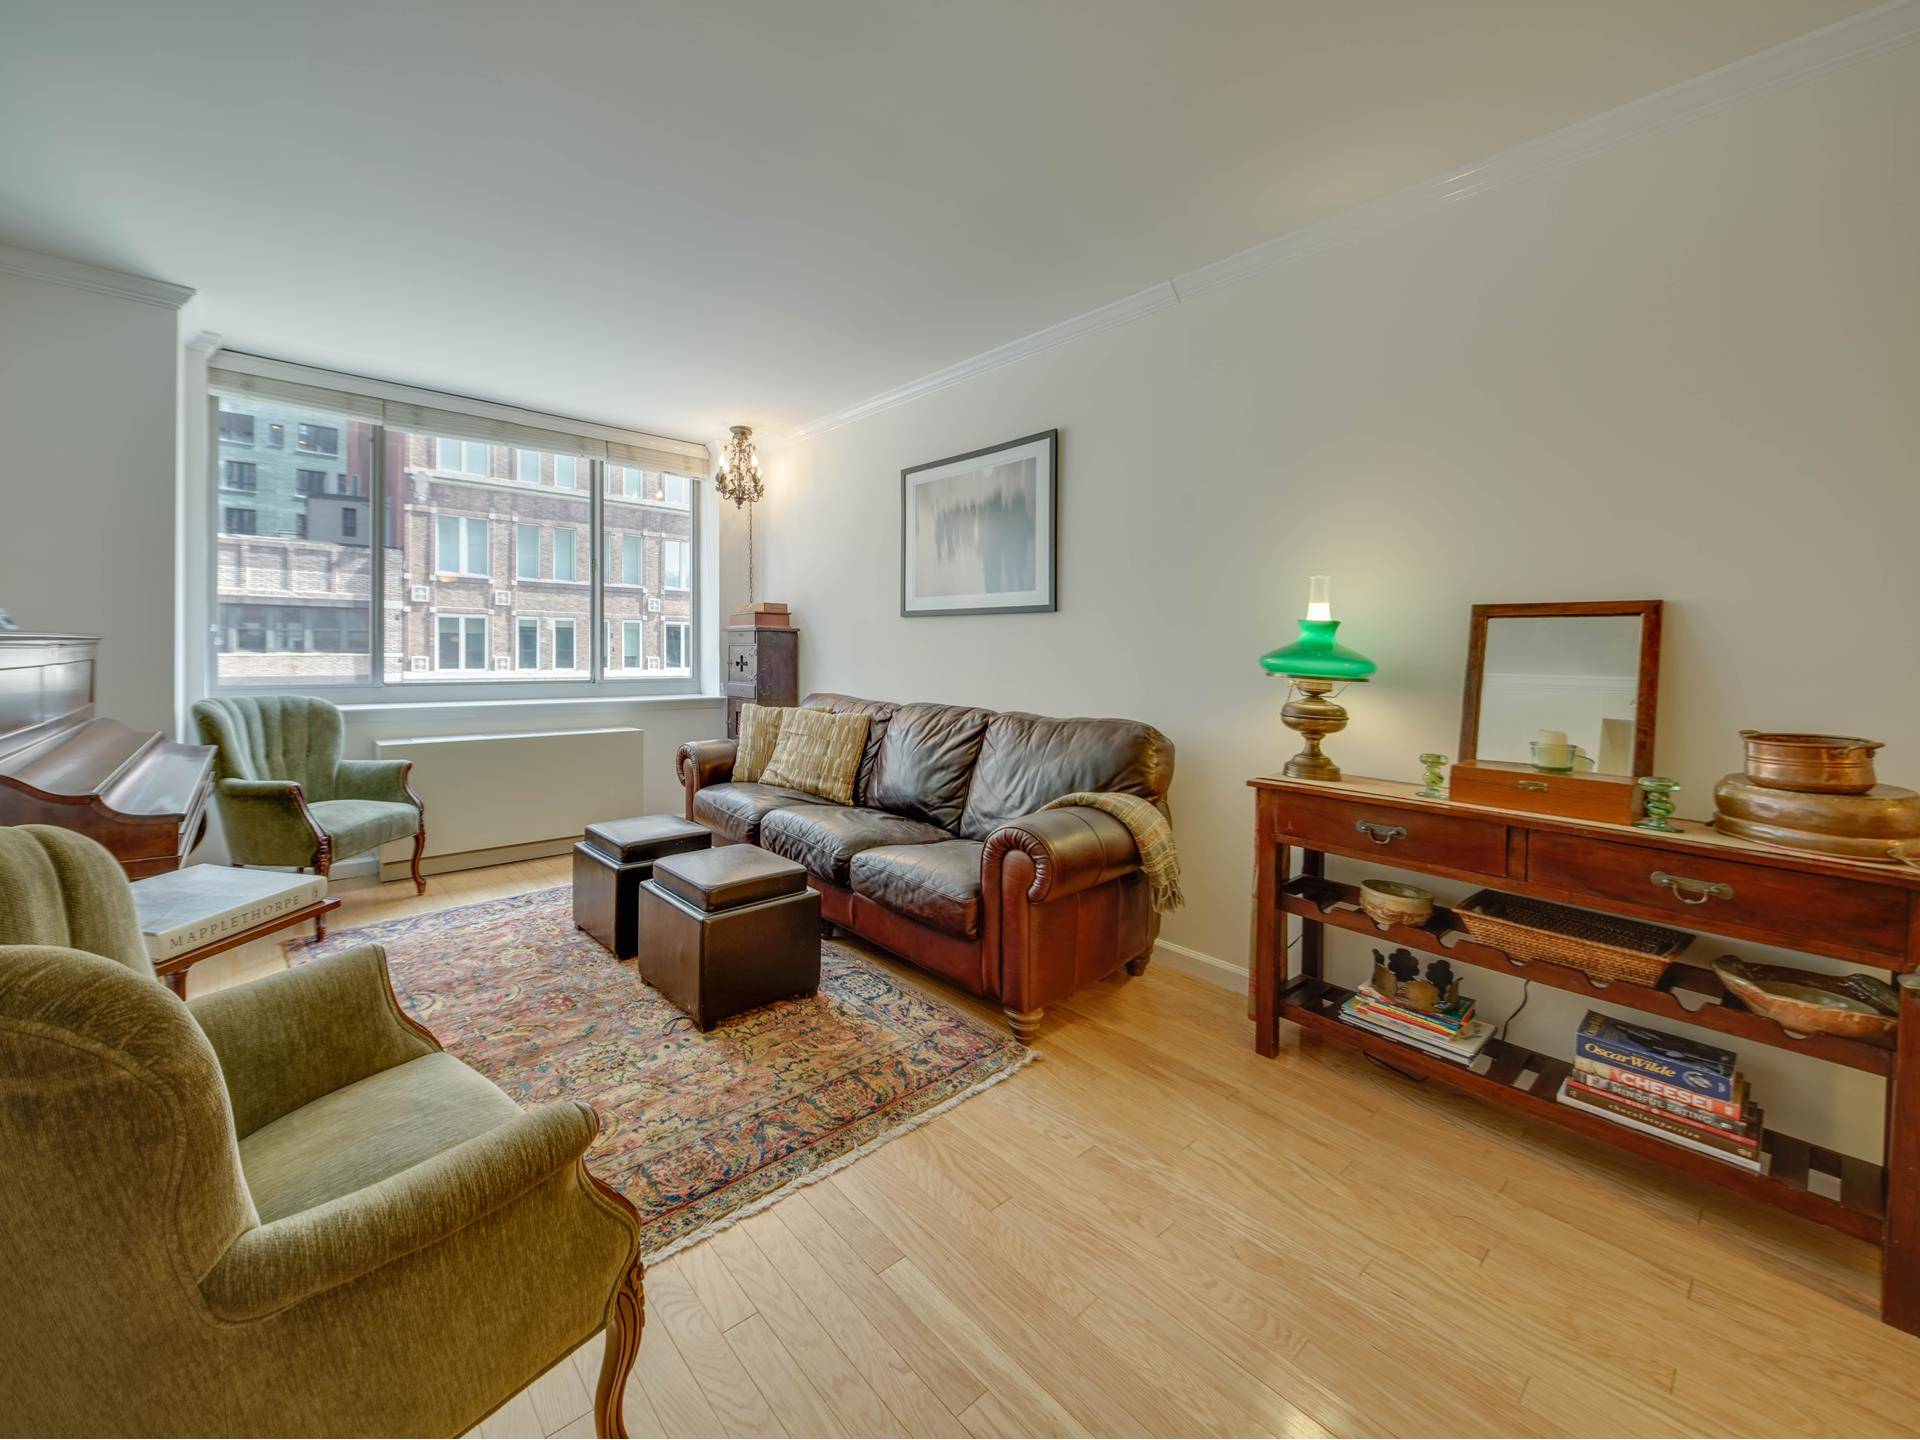 NO BOARD INTERVIEW INVESTOR FRIENDLY UNLIMITED SUBLETTING 2BEDROOM 2BATHROOM with Washer Dryer in Unit and This bright Two Bedroom Two Bathroom in West Chelsea Gallery District provides High Line and ...